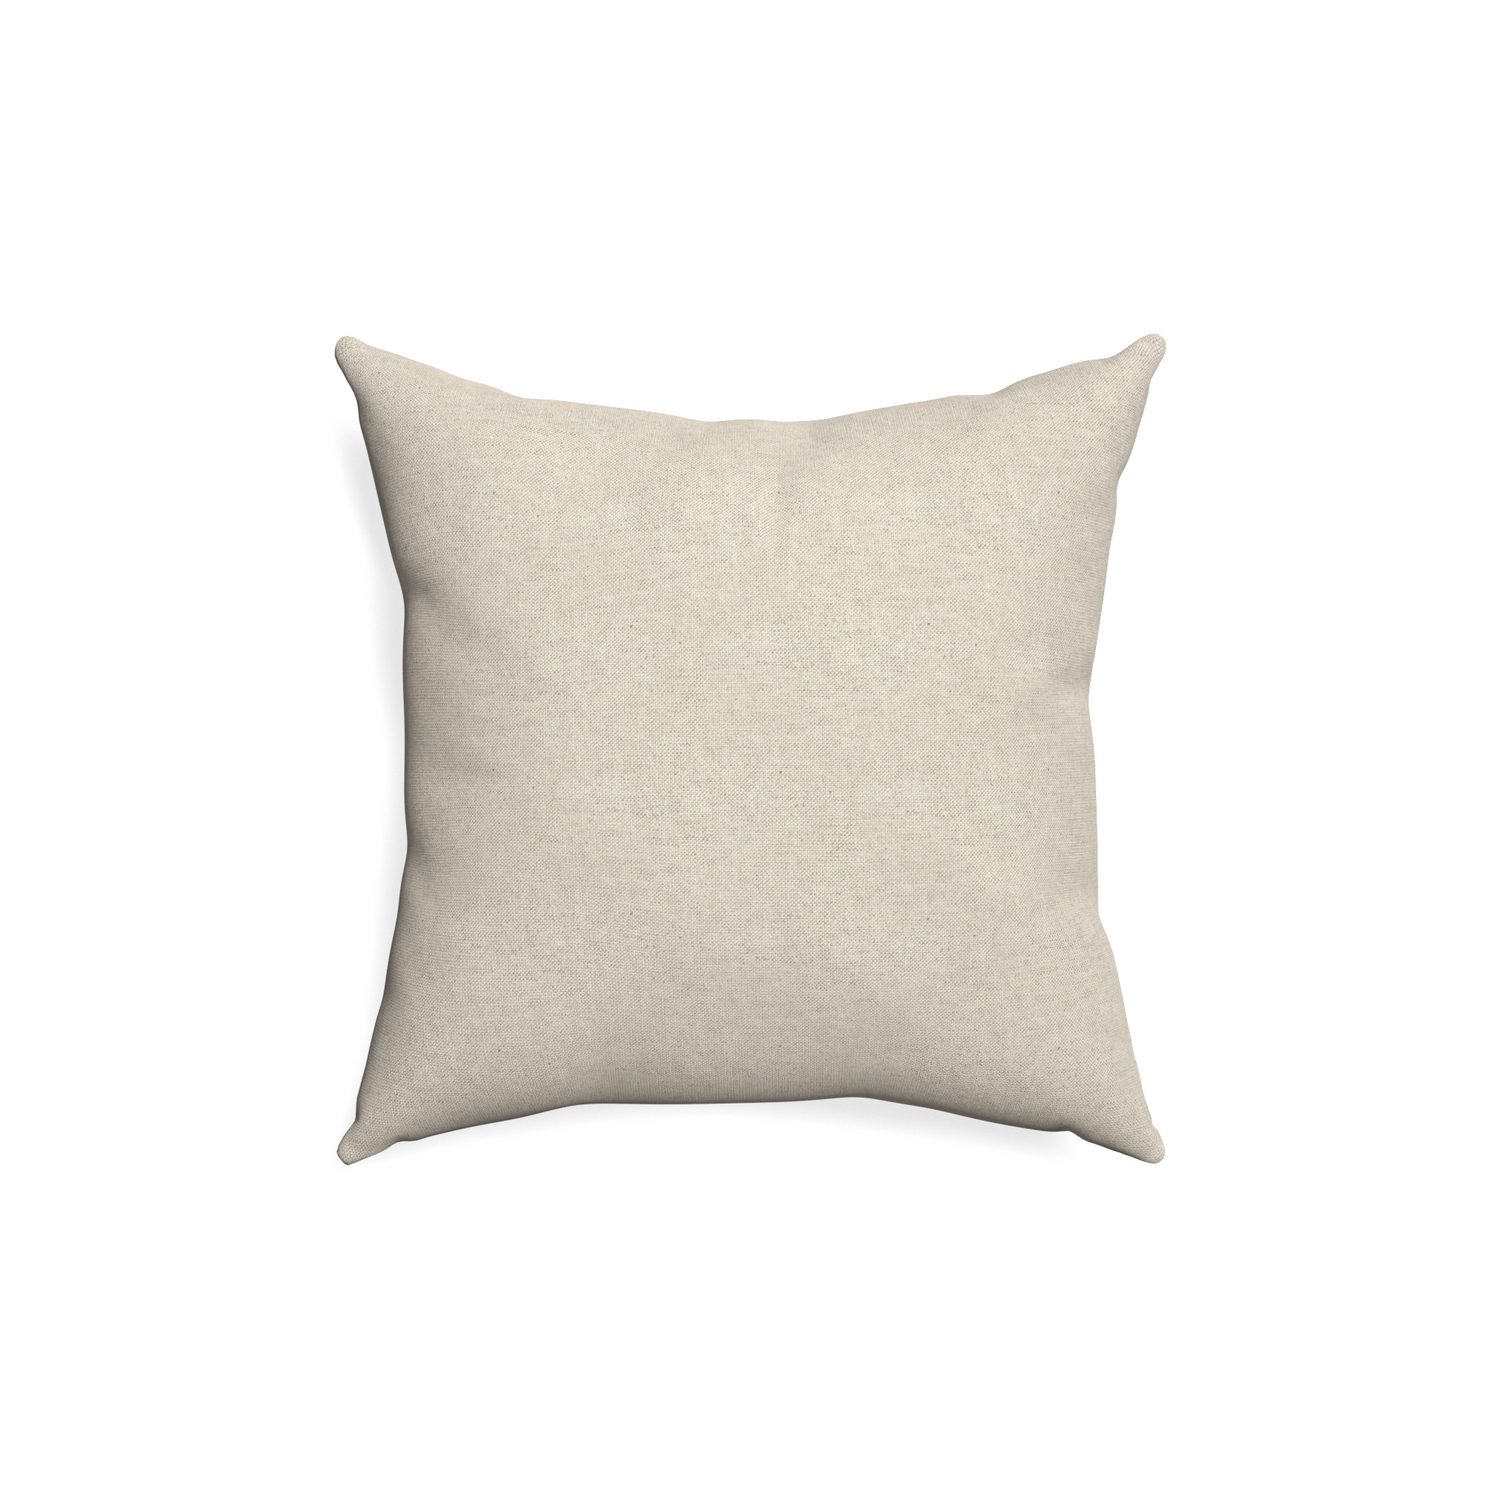 18-square oat custom light brownpillow with none on white background